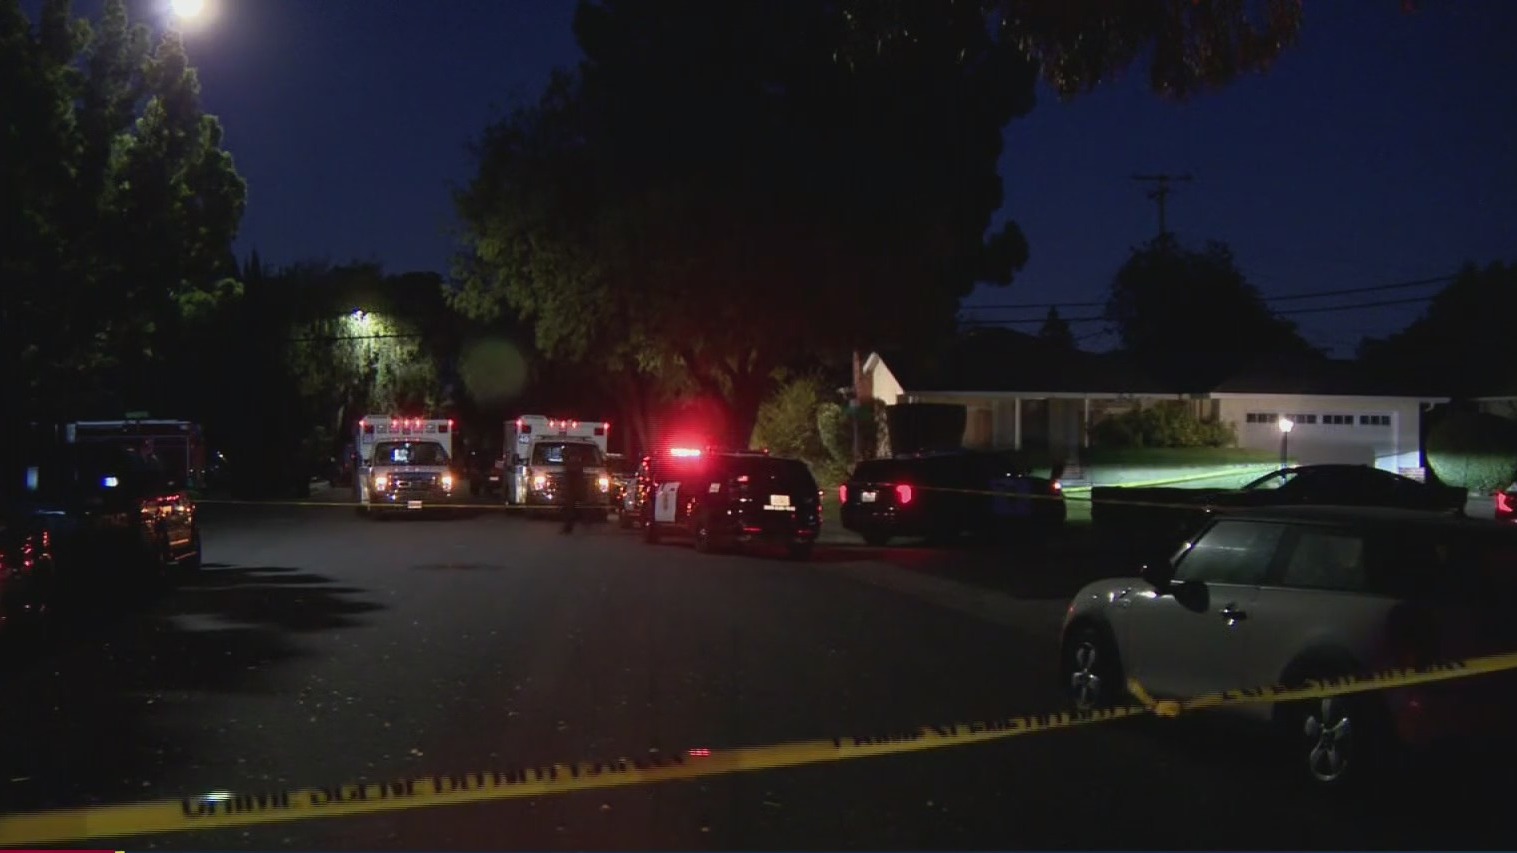 Scene of a standoff on the 400 block of Pala Avenue in Sunnyvale on May 19, 2021. (CBS)